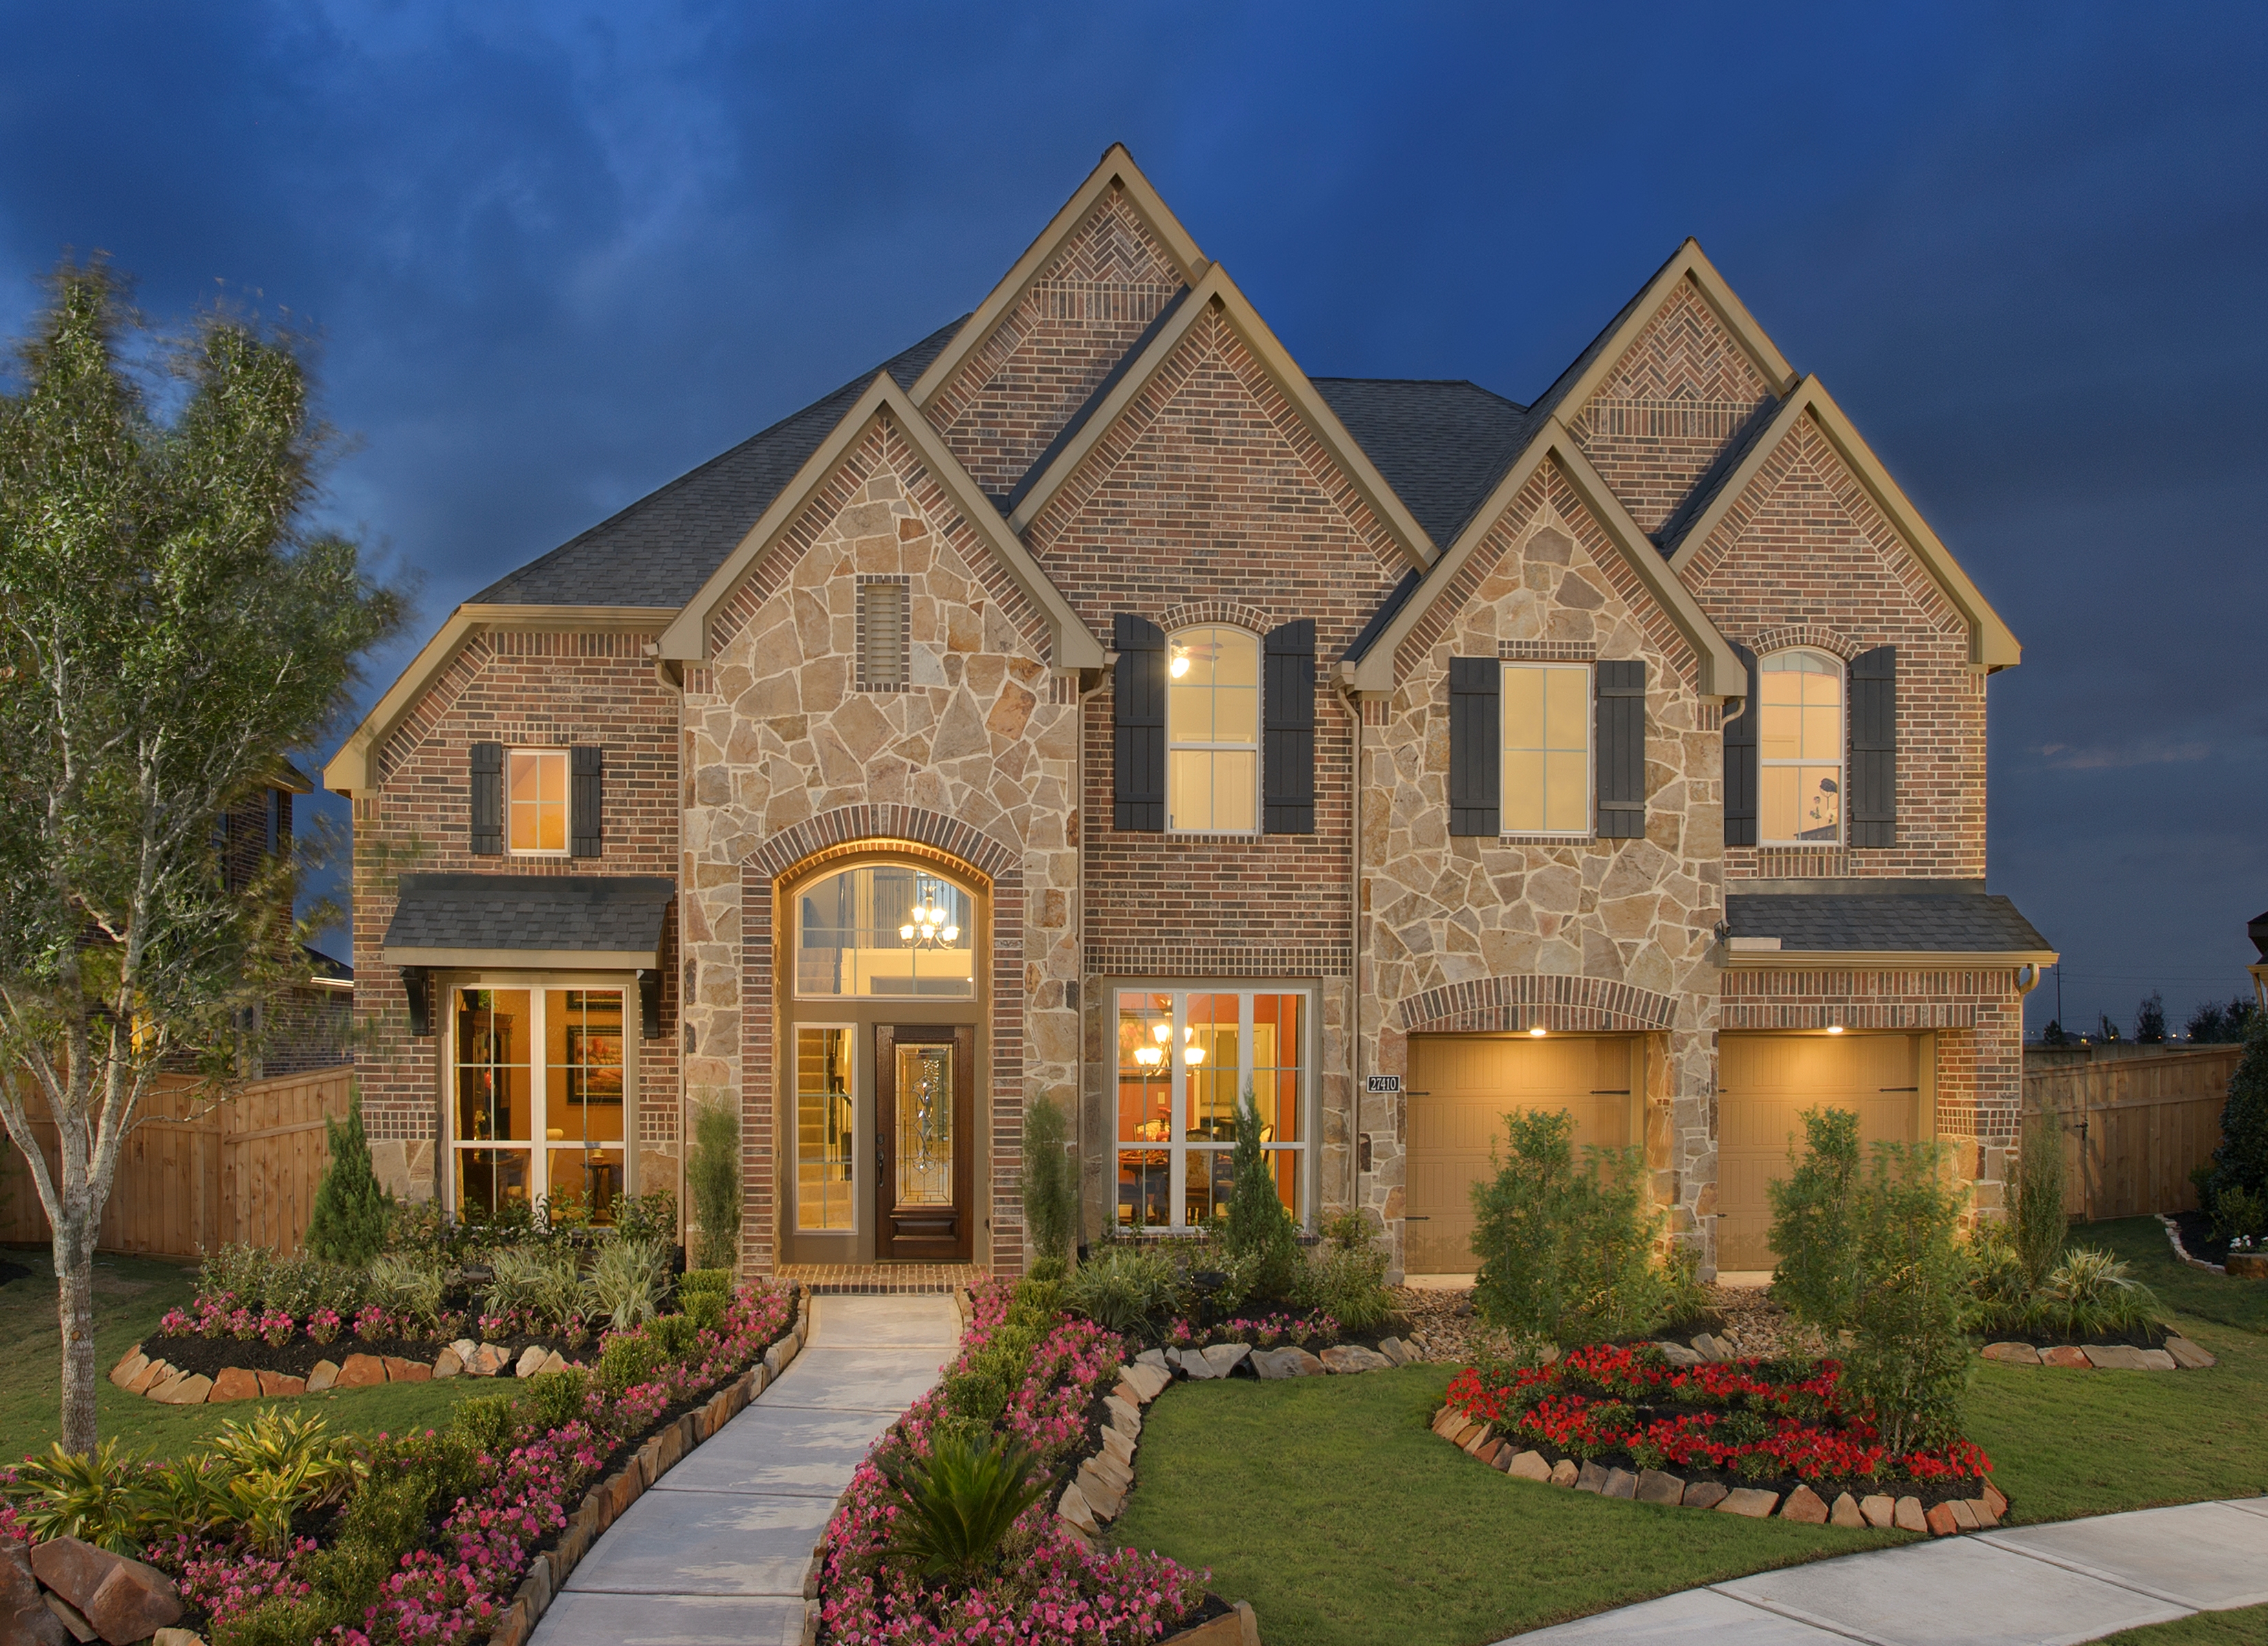 Download this Model New Home Perry Homes picture